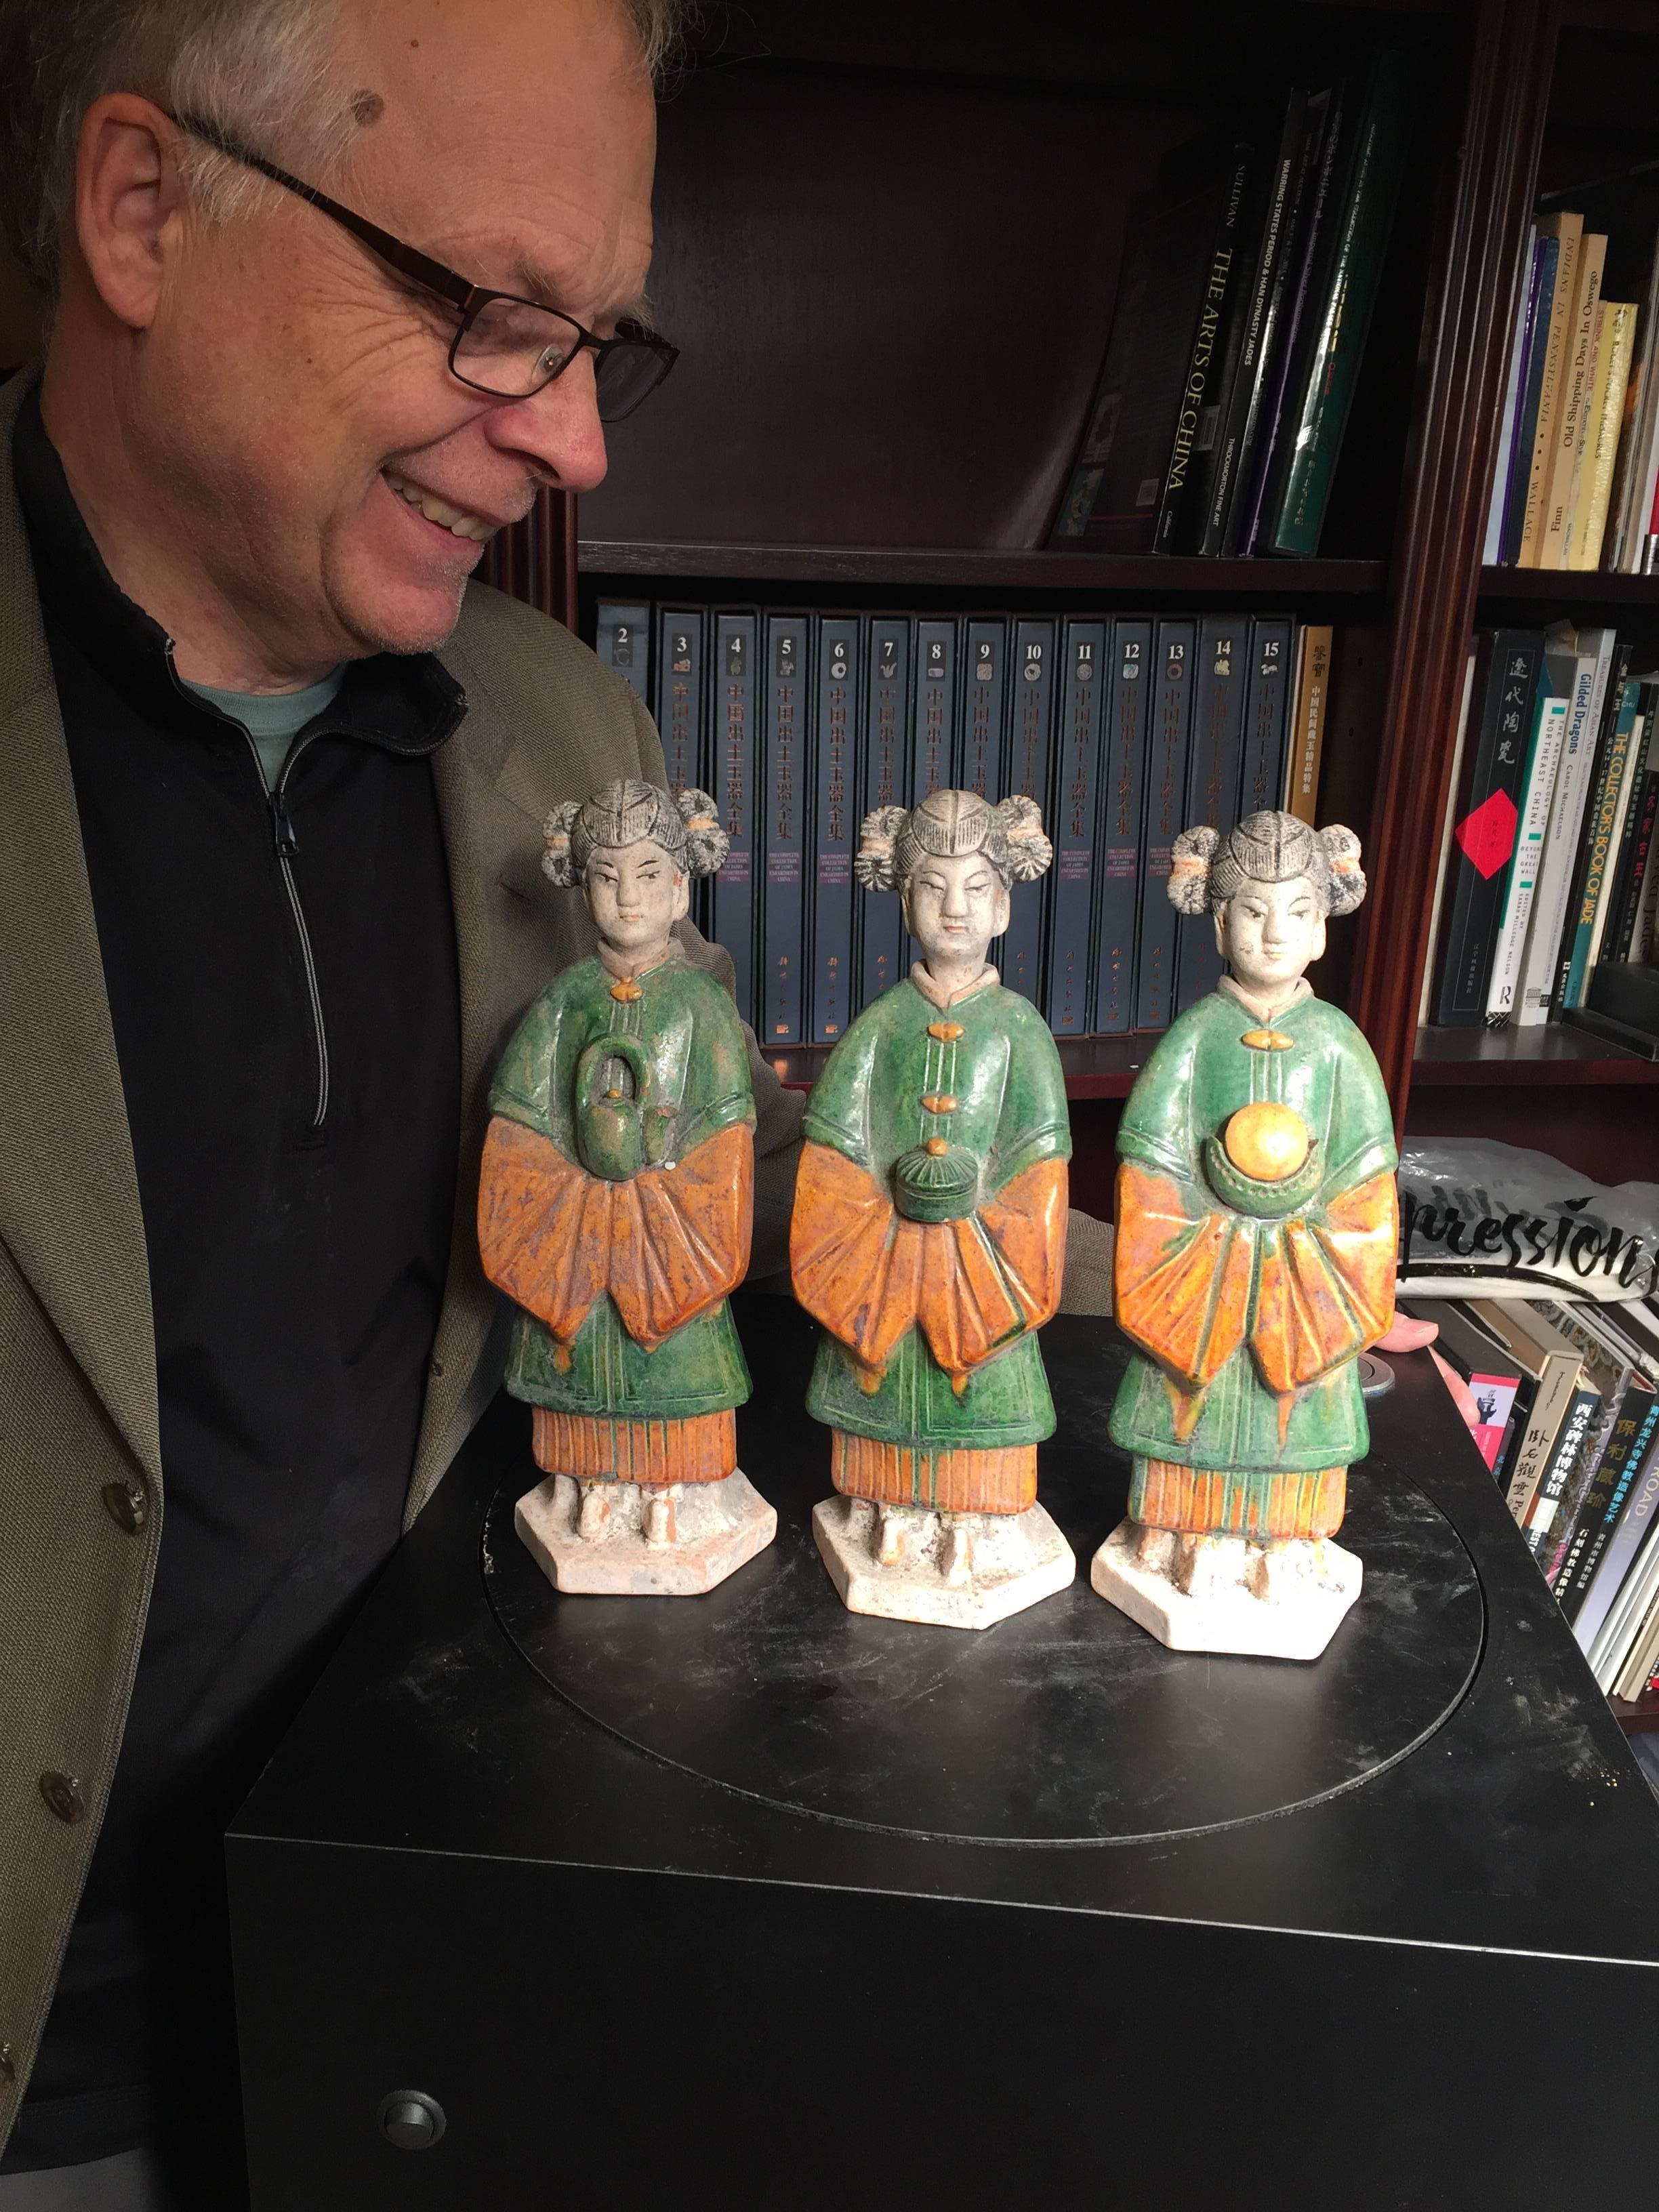 Important Ancient Chinese Trio of three women attendants handmade and hand glazed in green and amber colors - a collection three (3) figures, Ming Dynasty 1368-1644. Superb quality.

The statues each are dressed in long gowns with long sleeves,